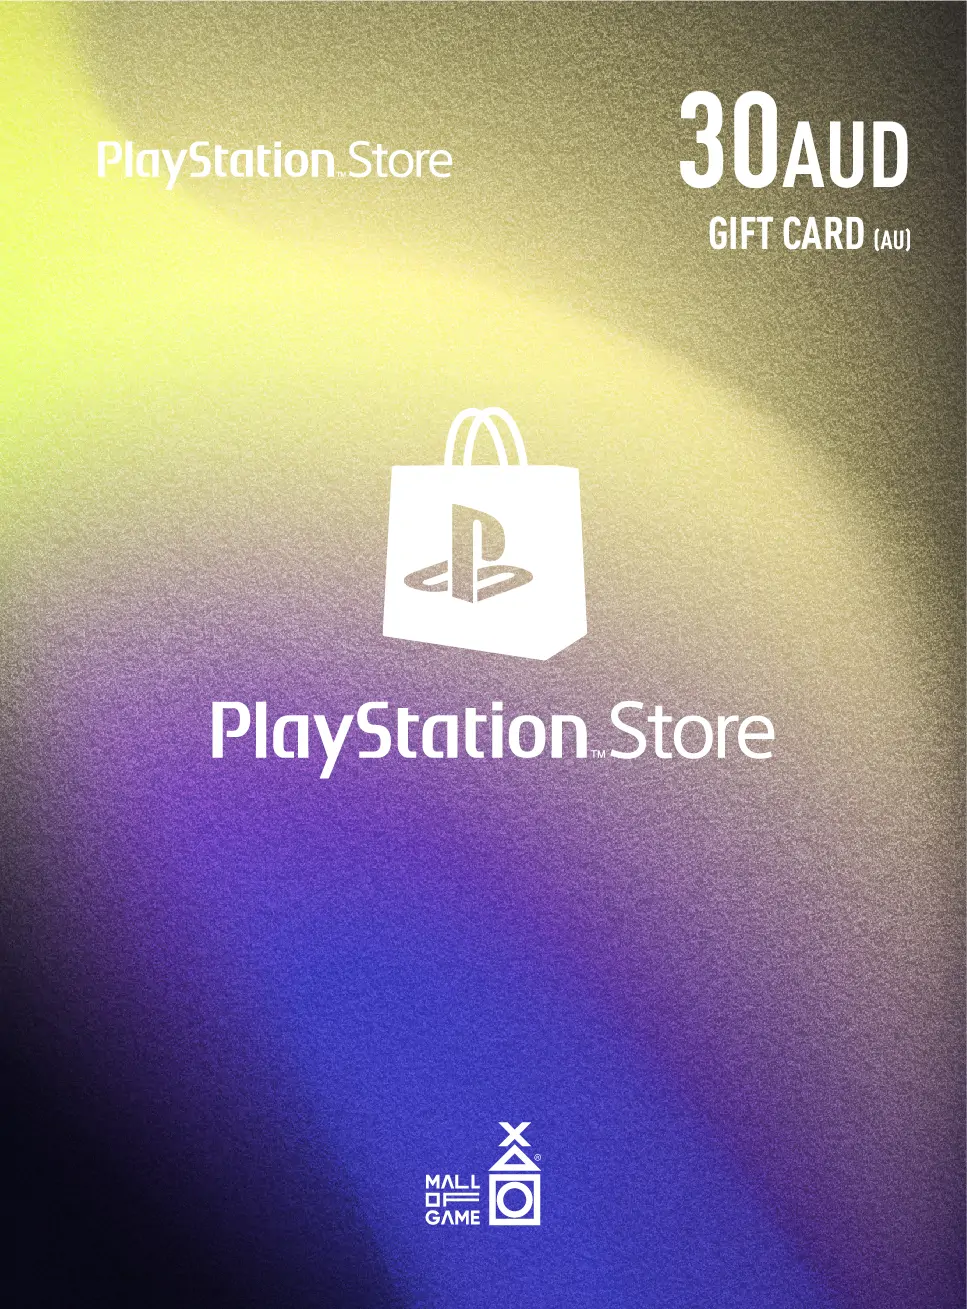 PlayStation™Store AUD30 Gift Cards (AU) 